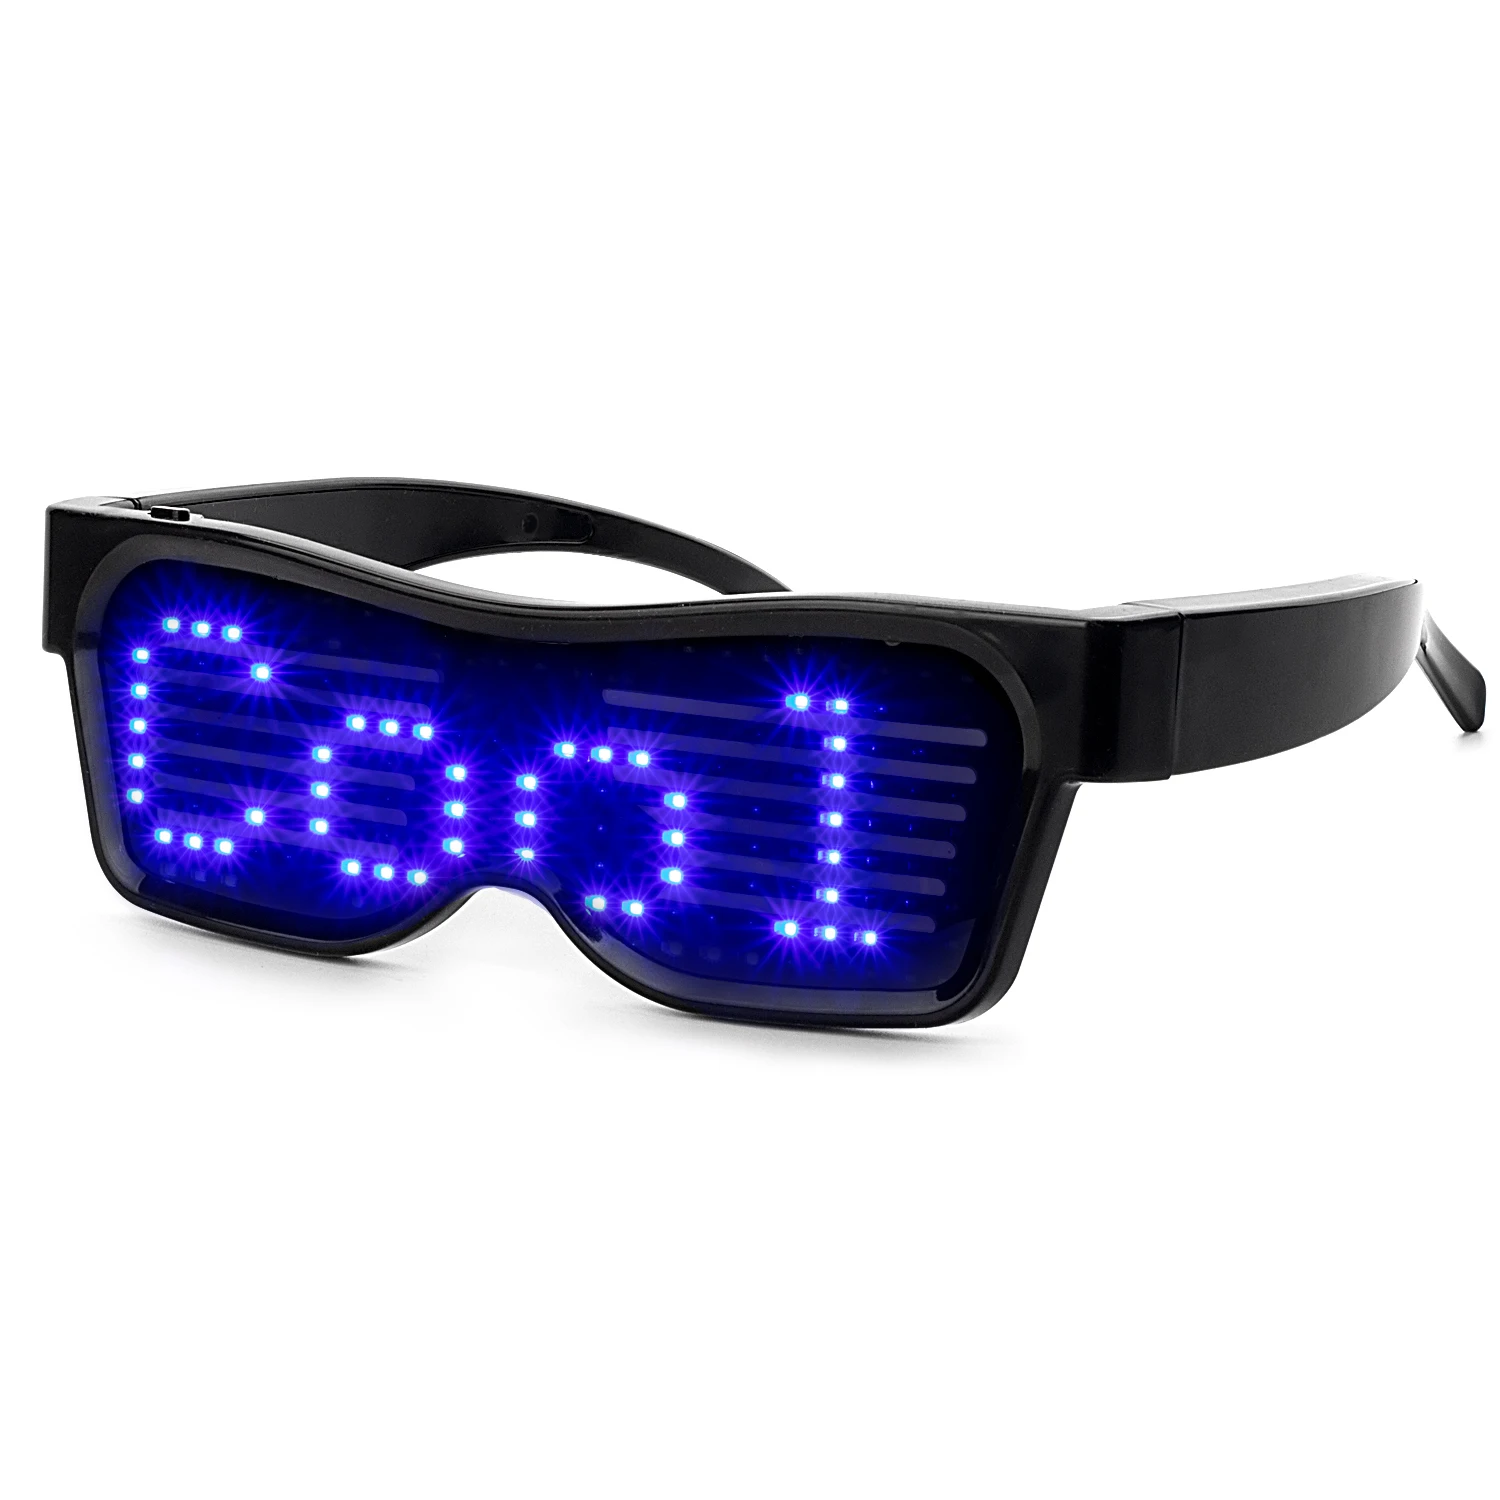 Bluetooth-Compatible APP LED Glasses Flashing - Display Messages,  Animation, DJ Holiday Party Birthday Children's Toy Gift - AliExpress